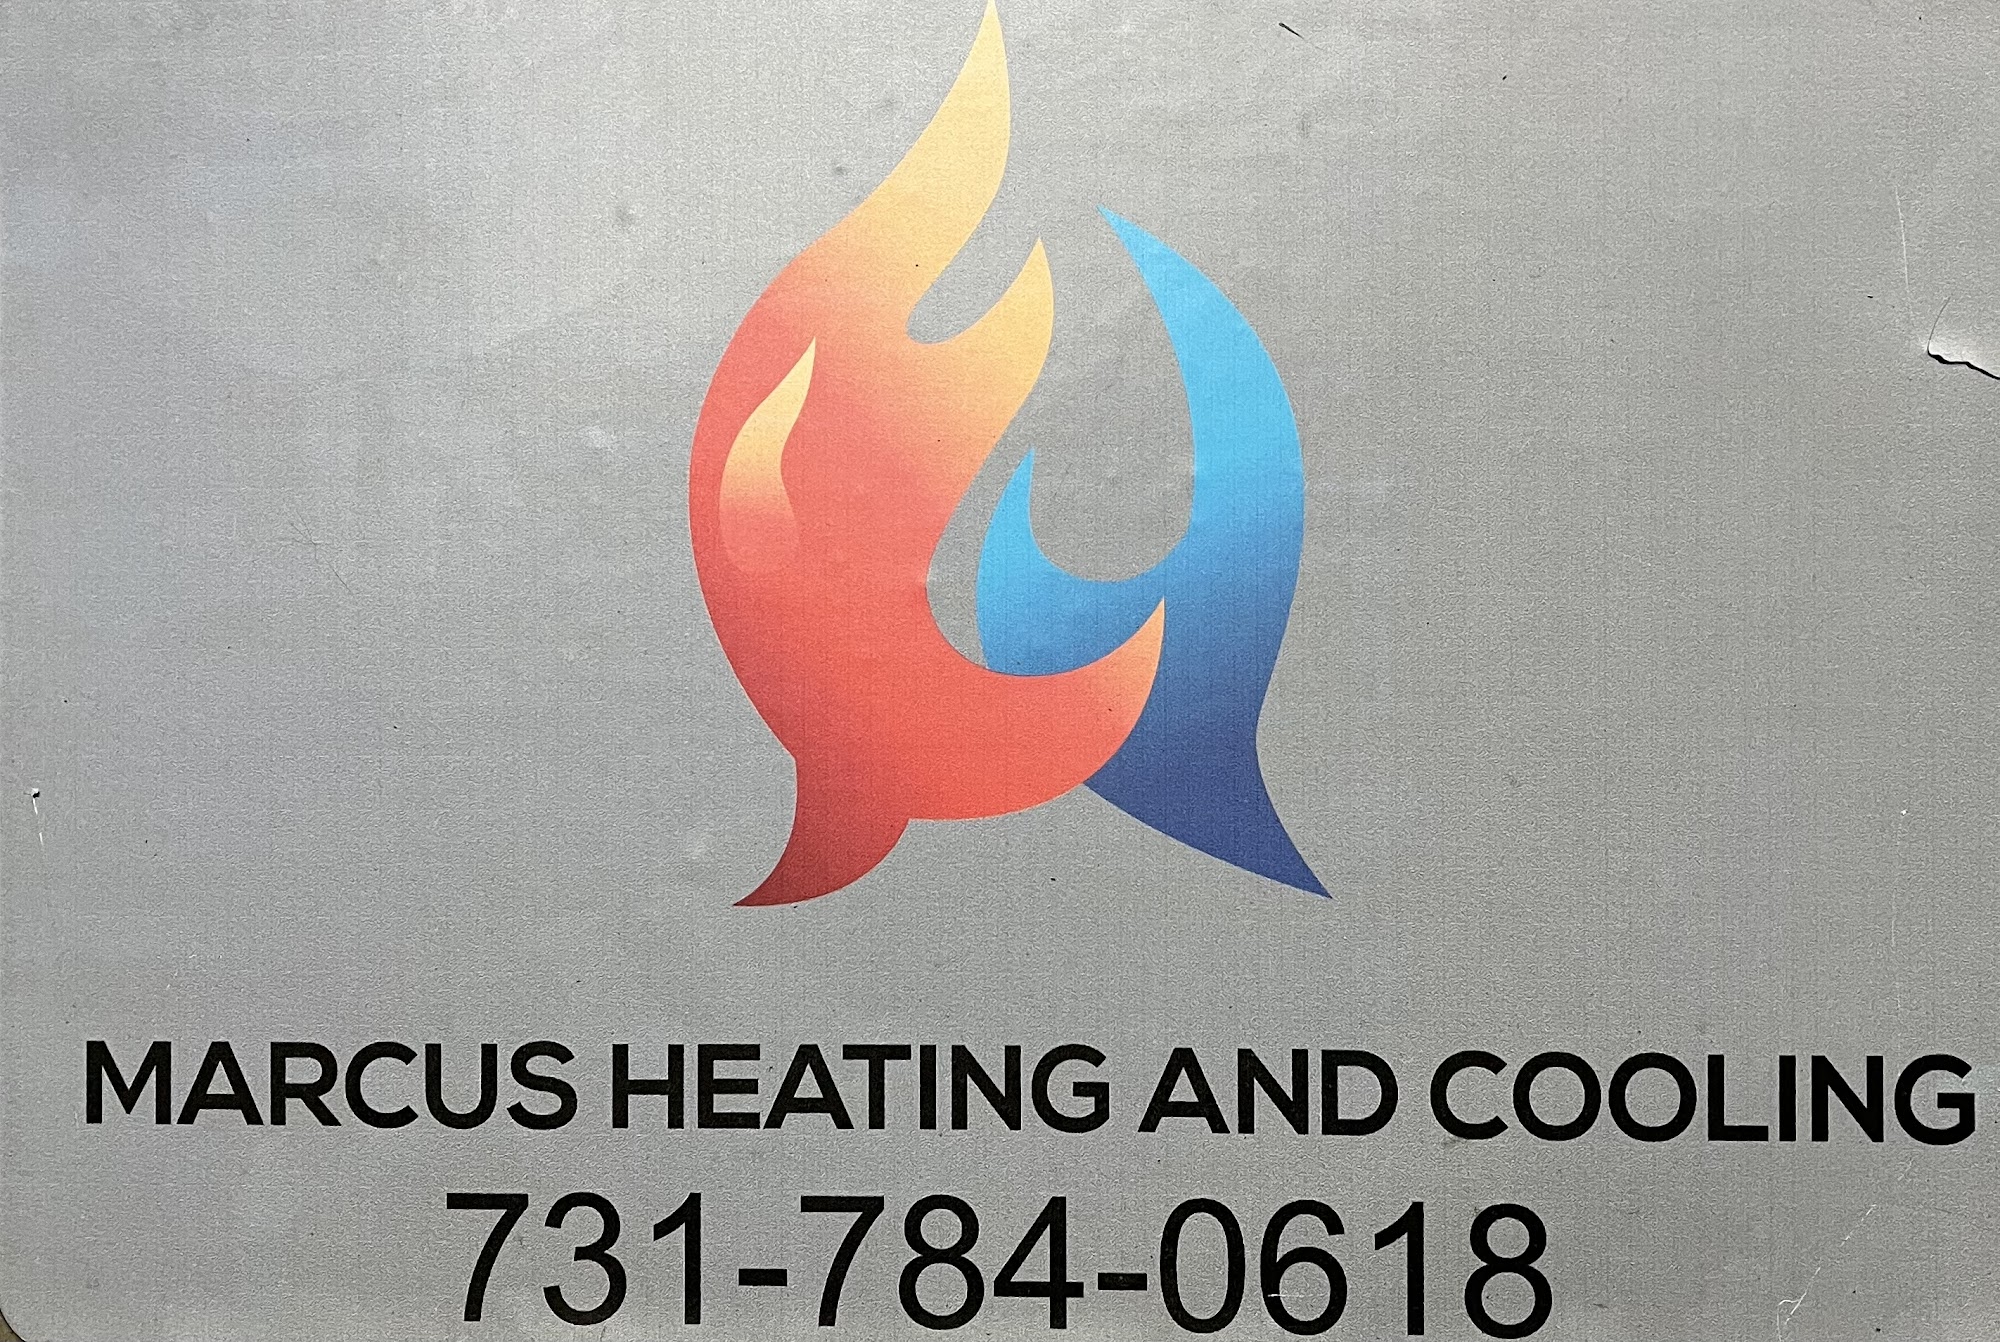 Marcus Heating And Cooling Inc 1625 Stallings Rd, Humboldt Tennessee 38343